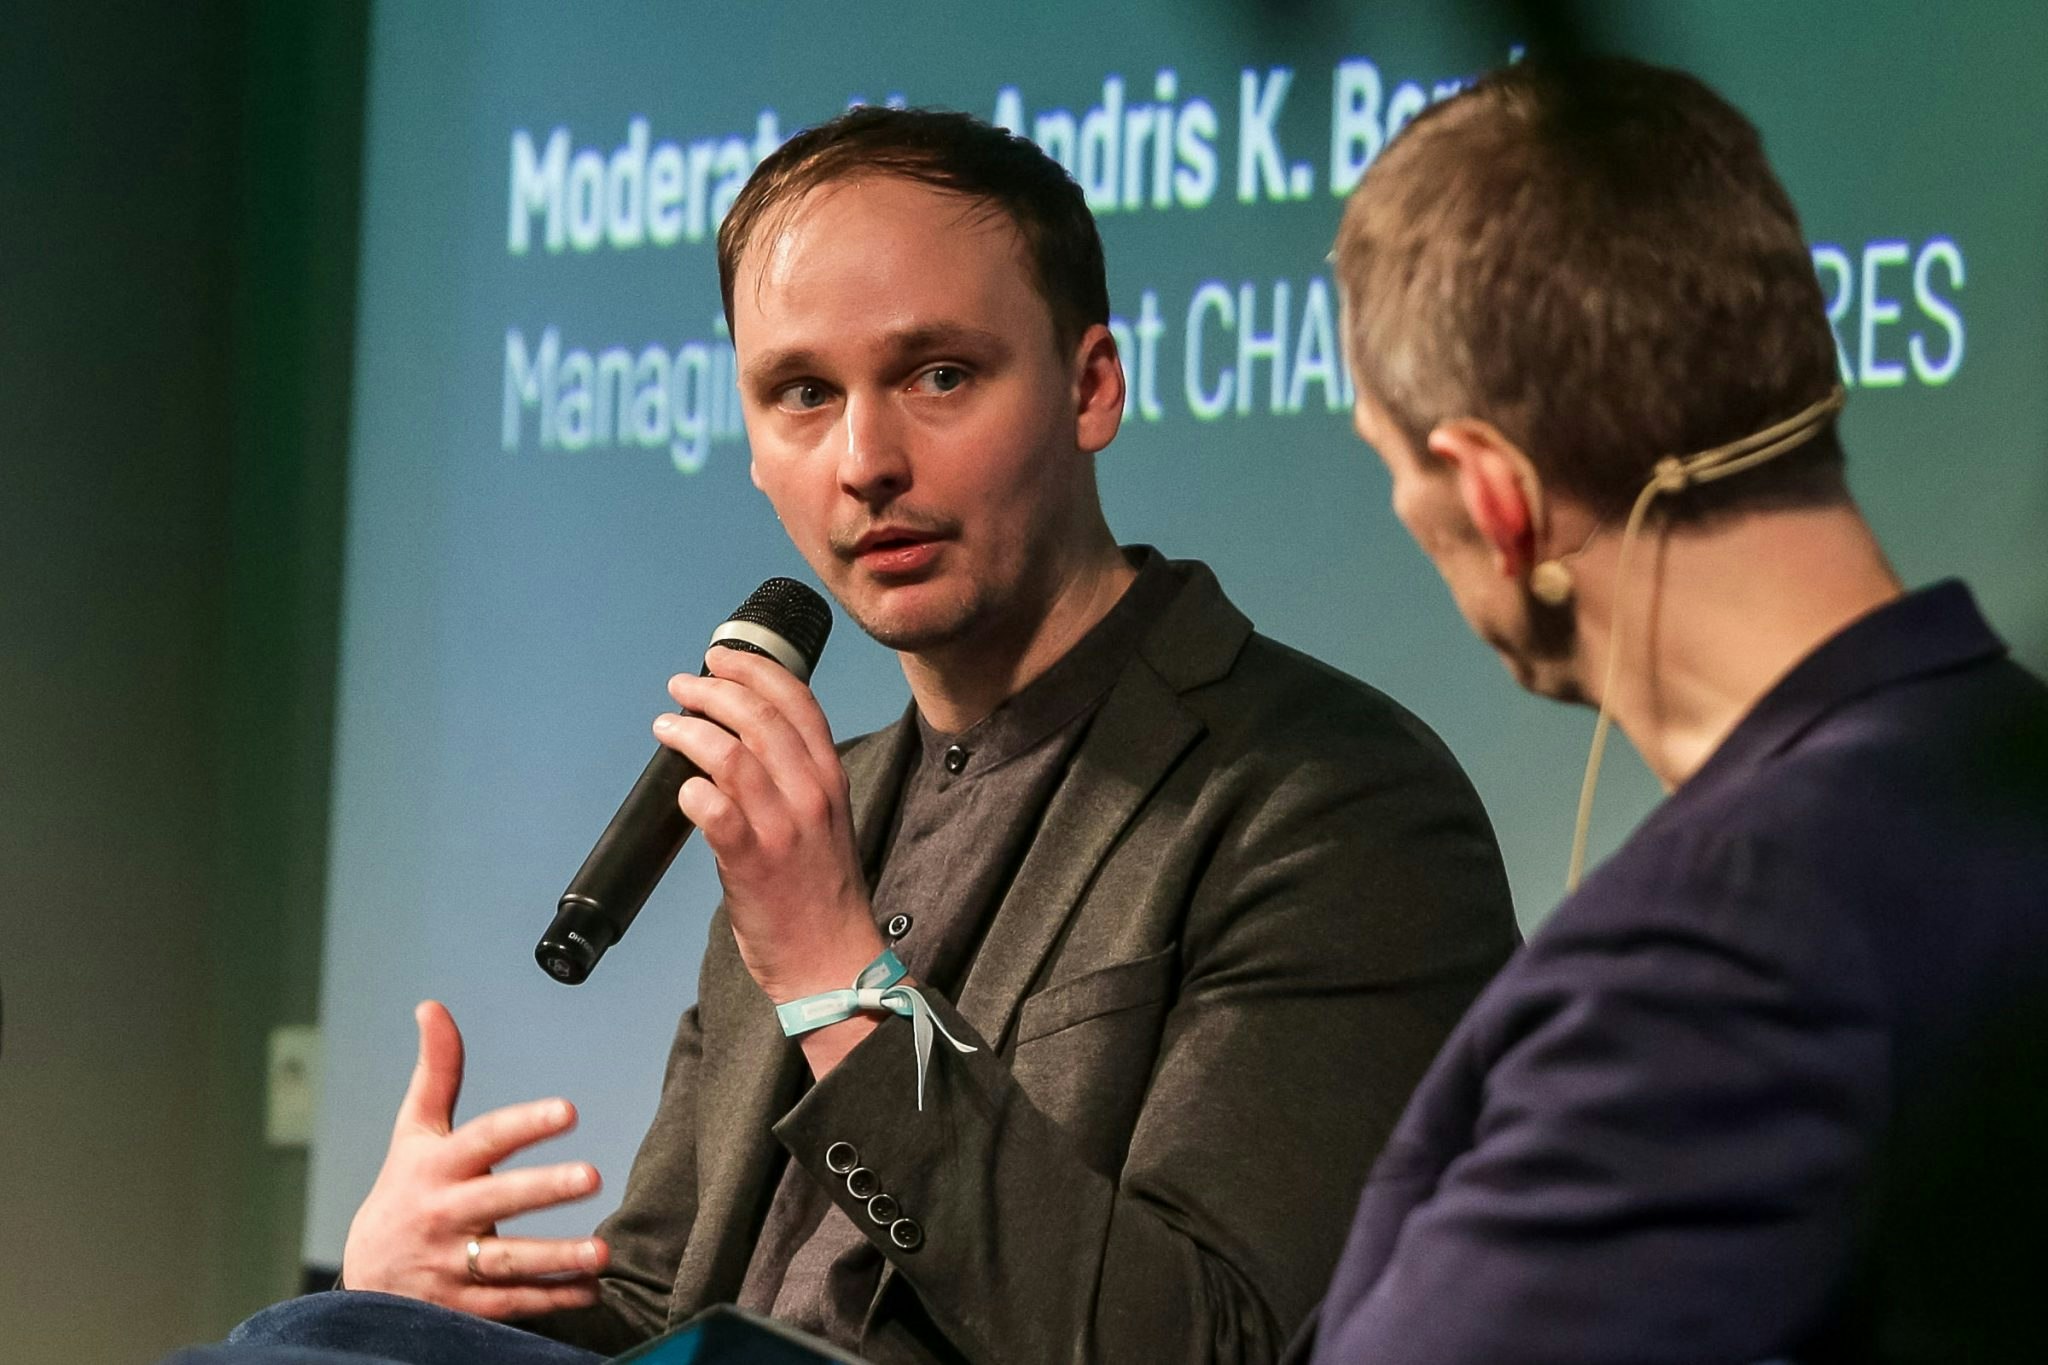 Nordigen cofounder and MD Rolands Mesters speaking at TechChill 2019. Credit: Lauris Vīksne.